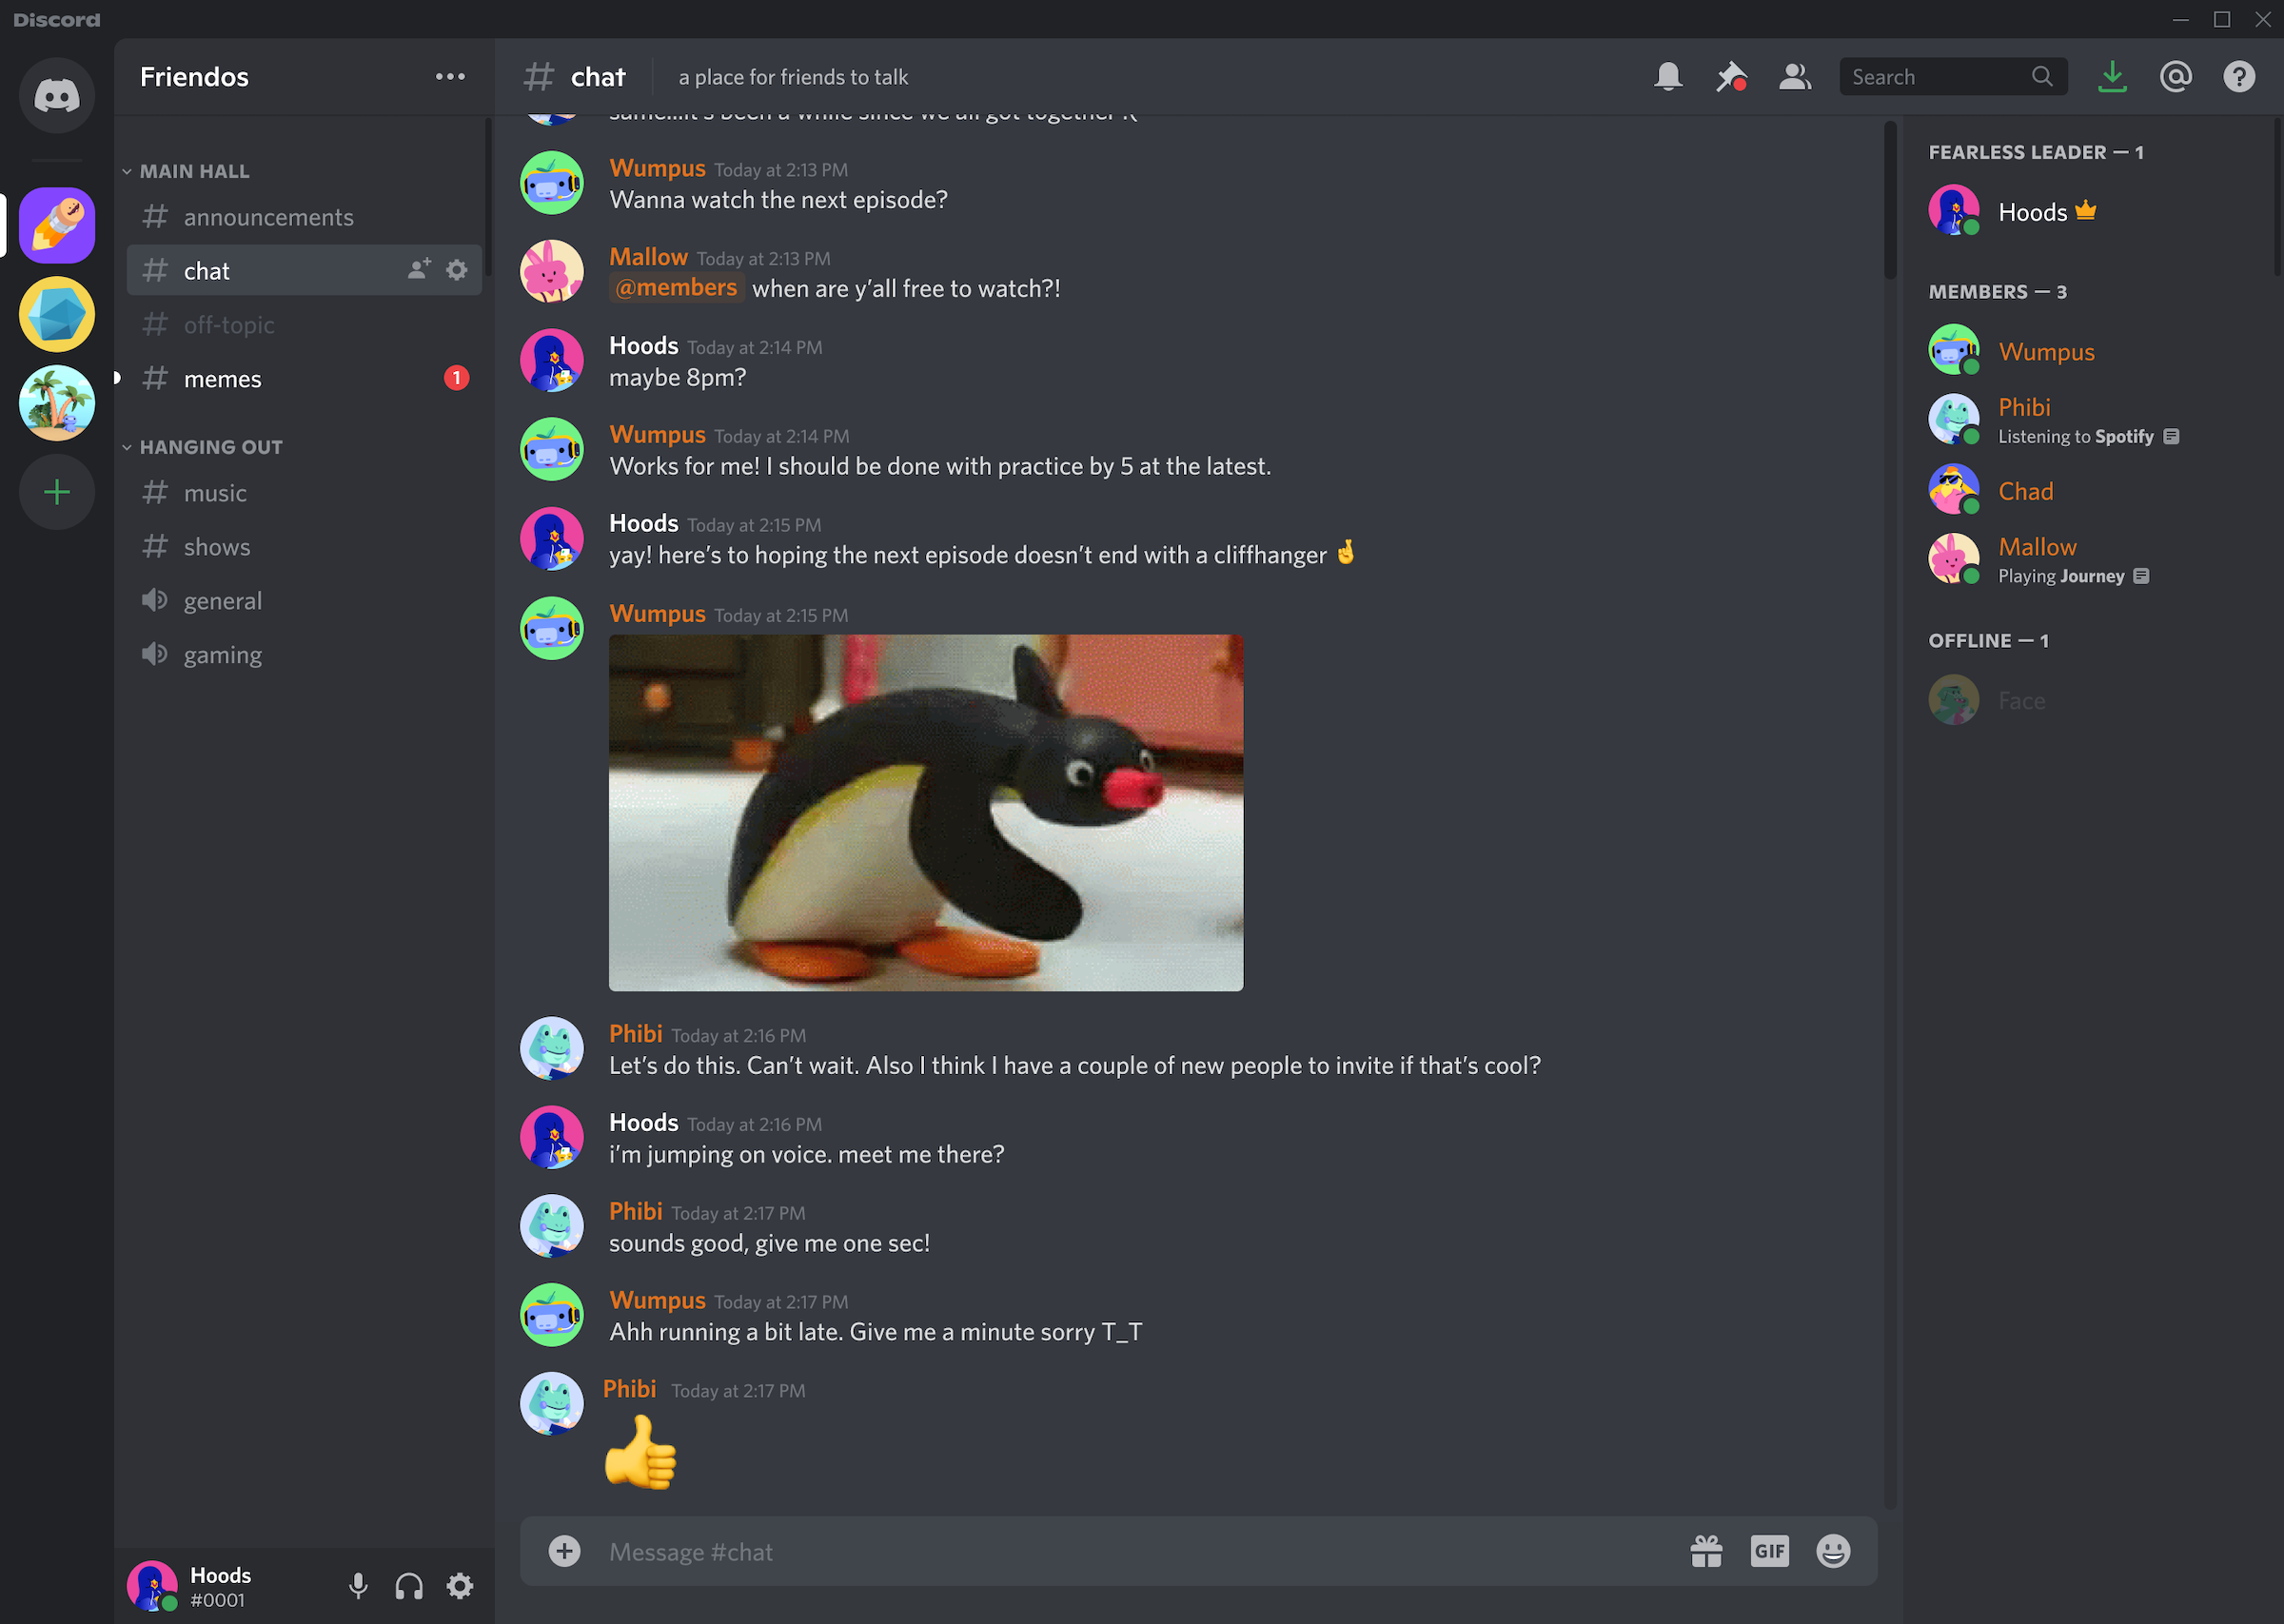 Discord page with conversation and photo of animated penguin.